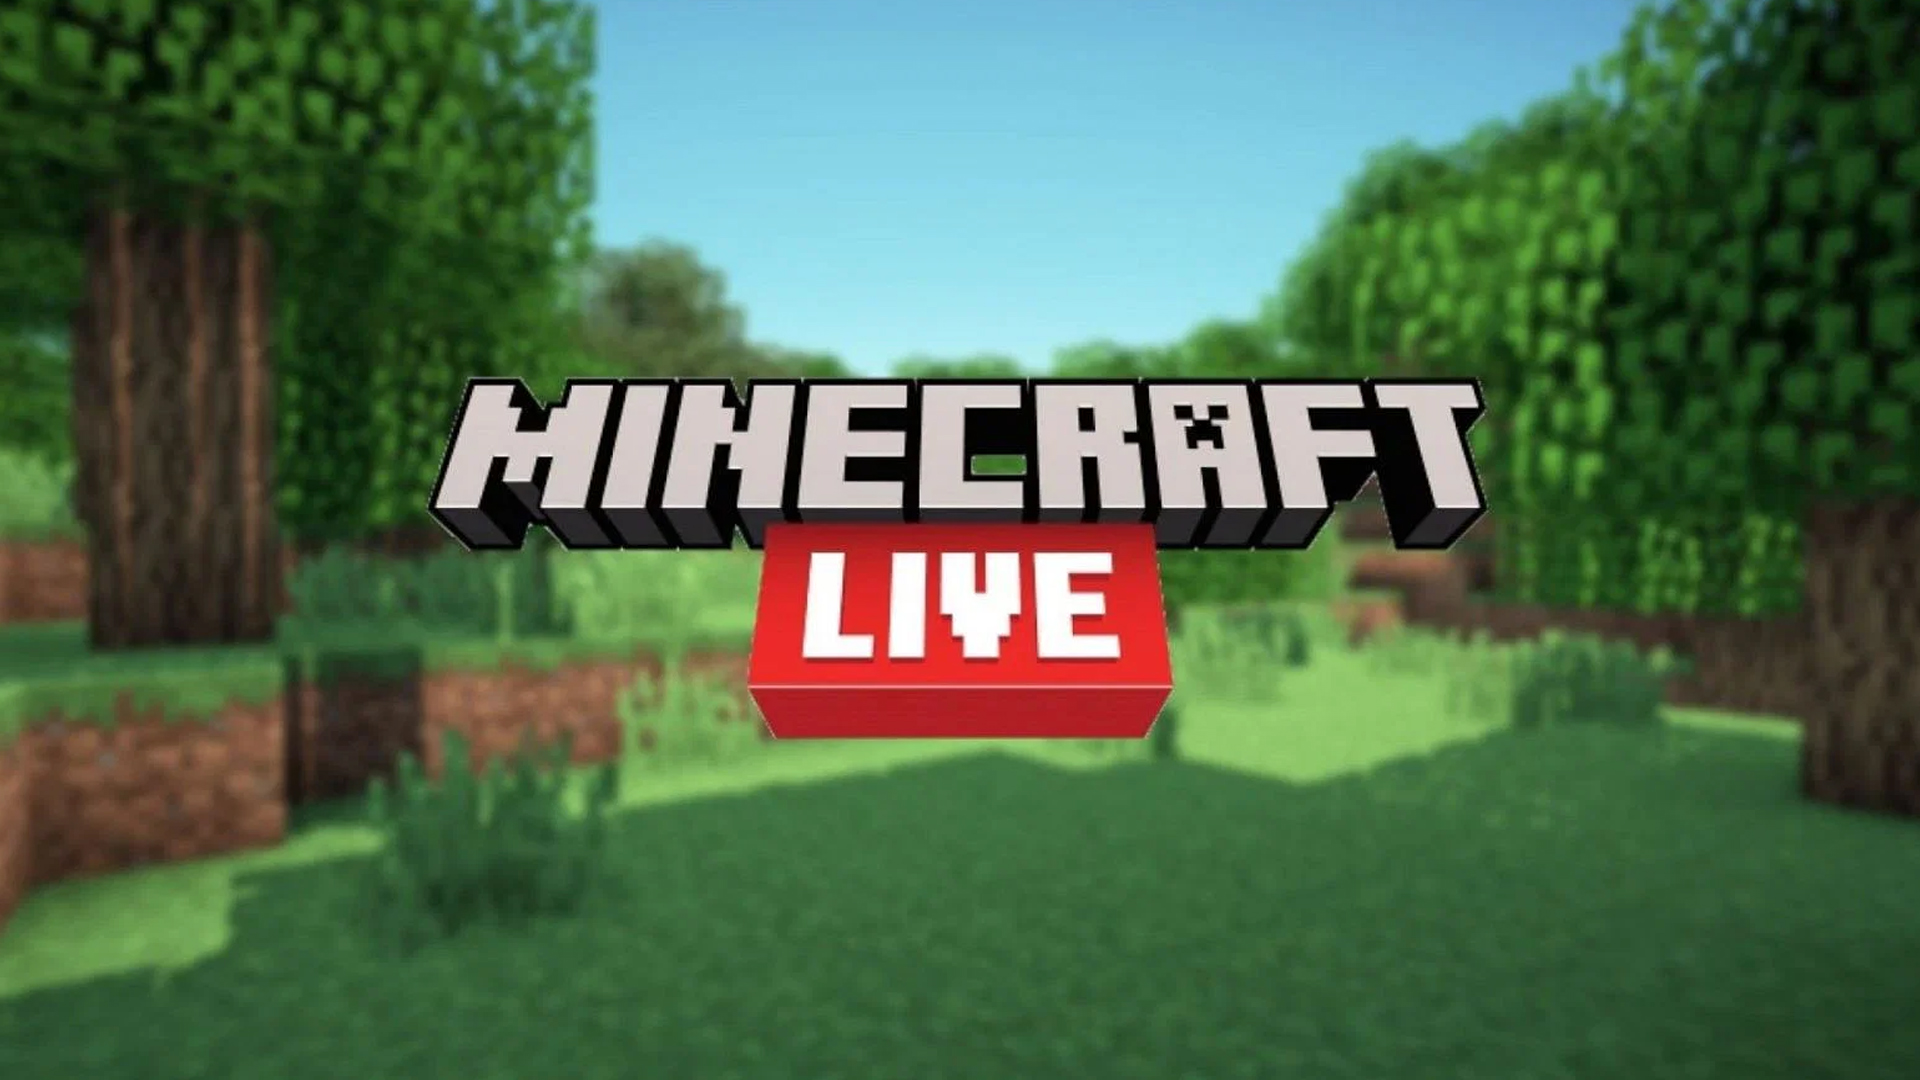 Minecraft leaks suggest a Minecraft Live 2022 tie-in event